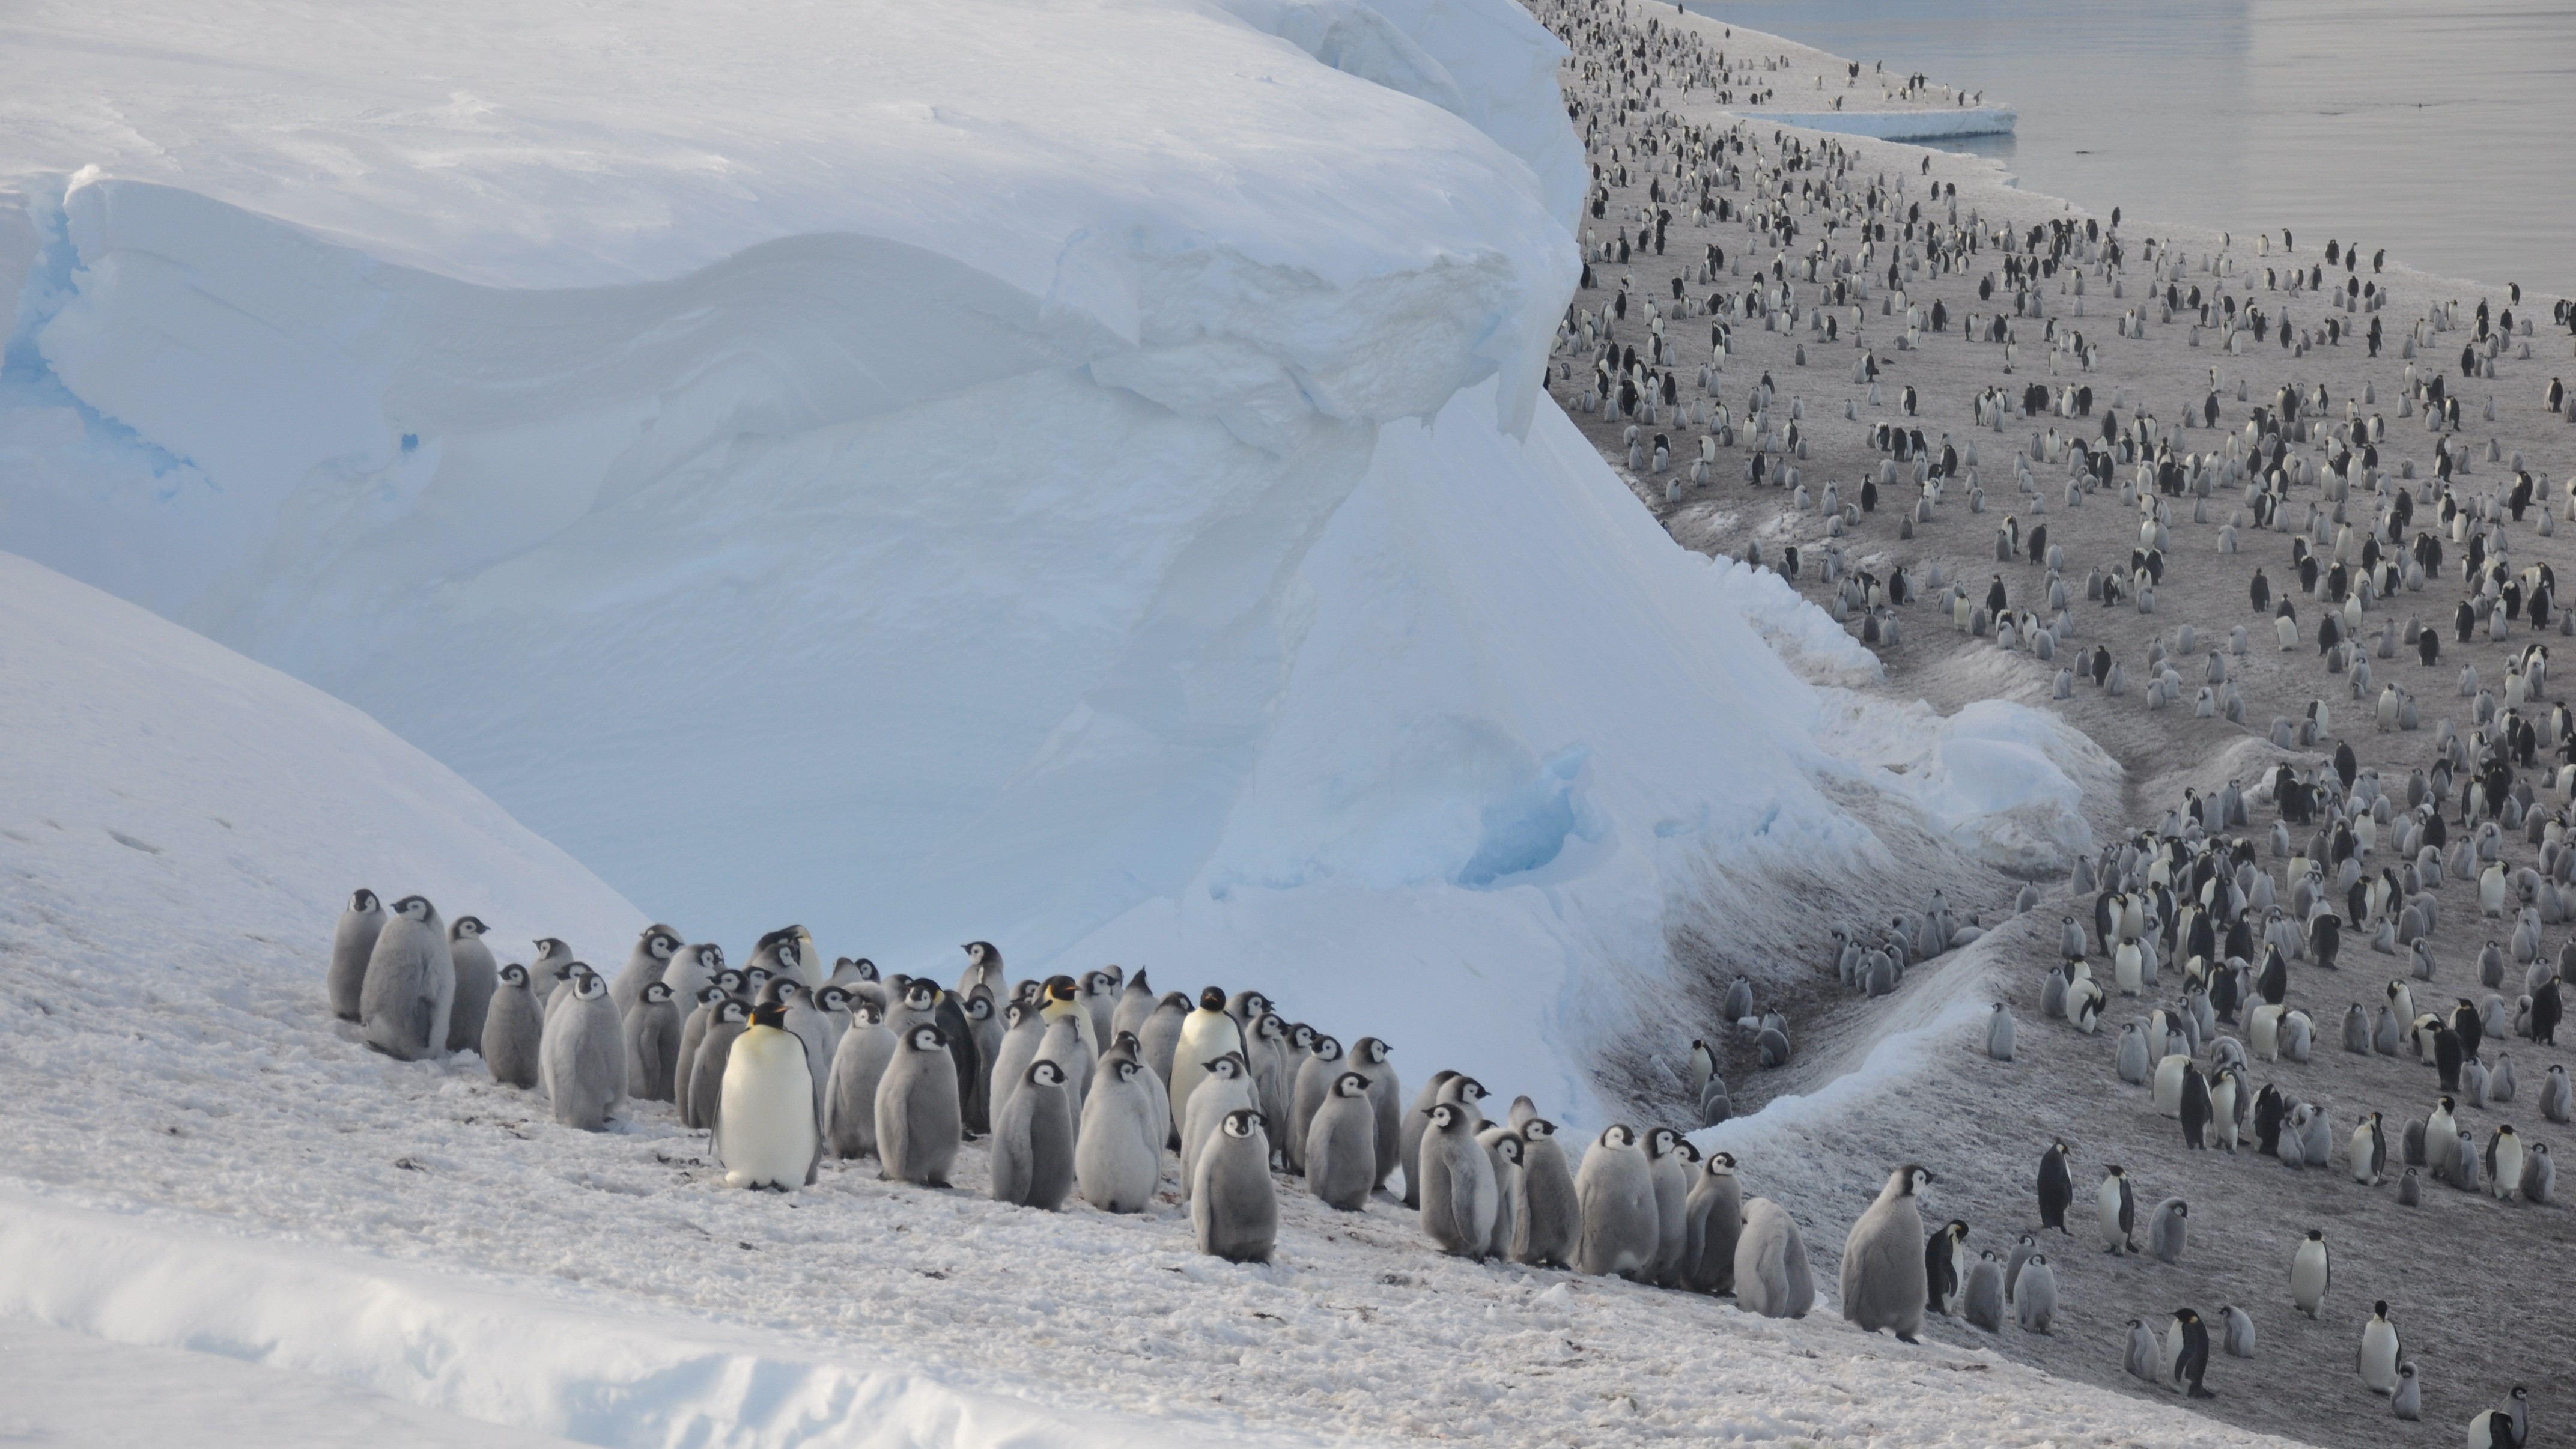 Hundreds of emperor penguin chicks spotted plunging off a 50-foot cliff in 1st-of-its-kind footage thumbnail